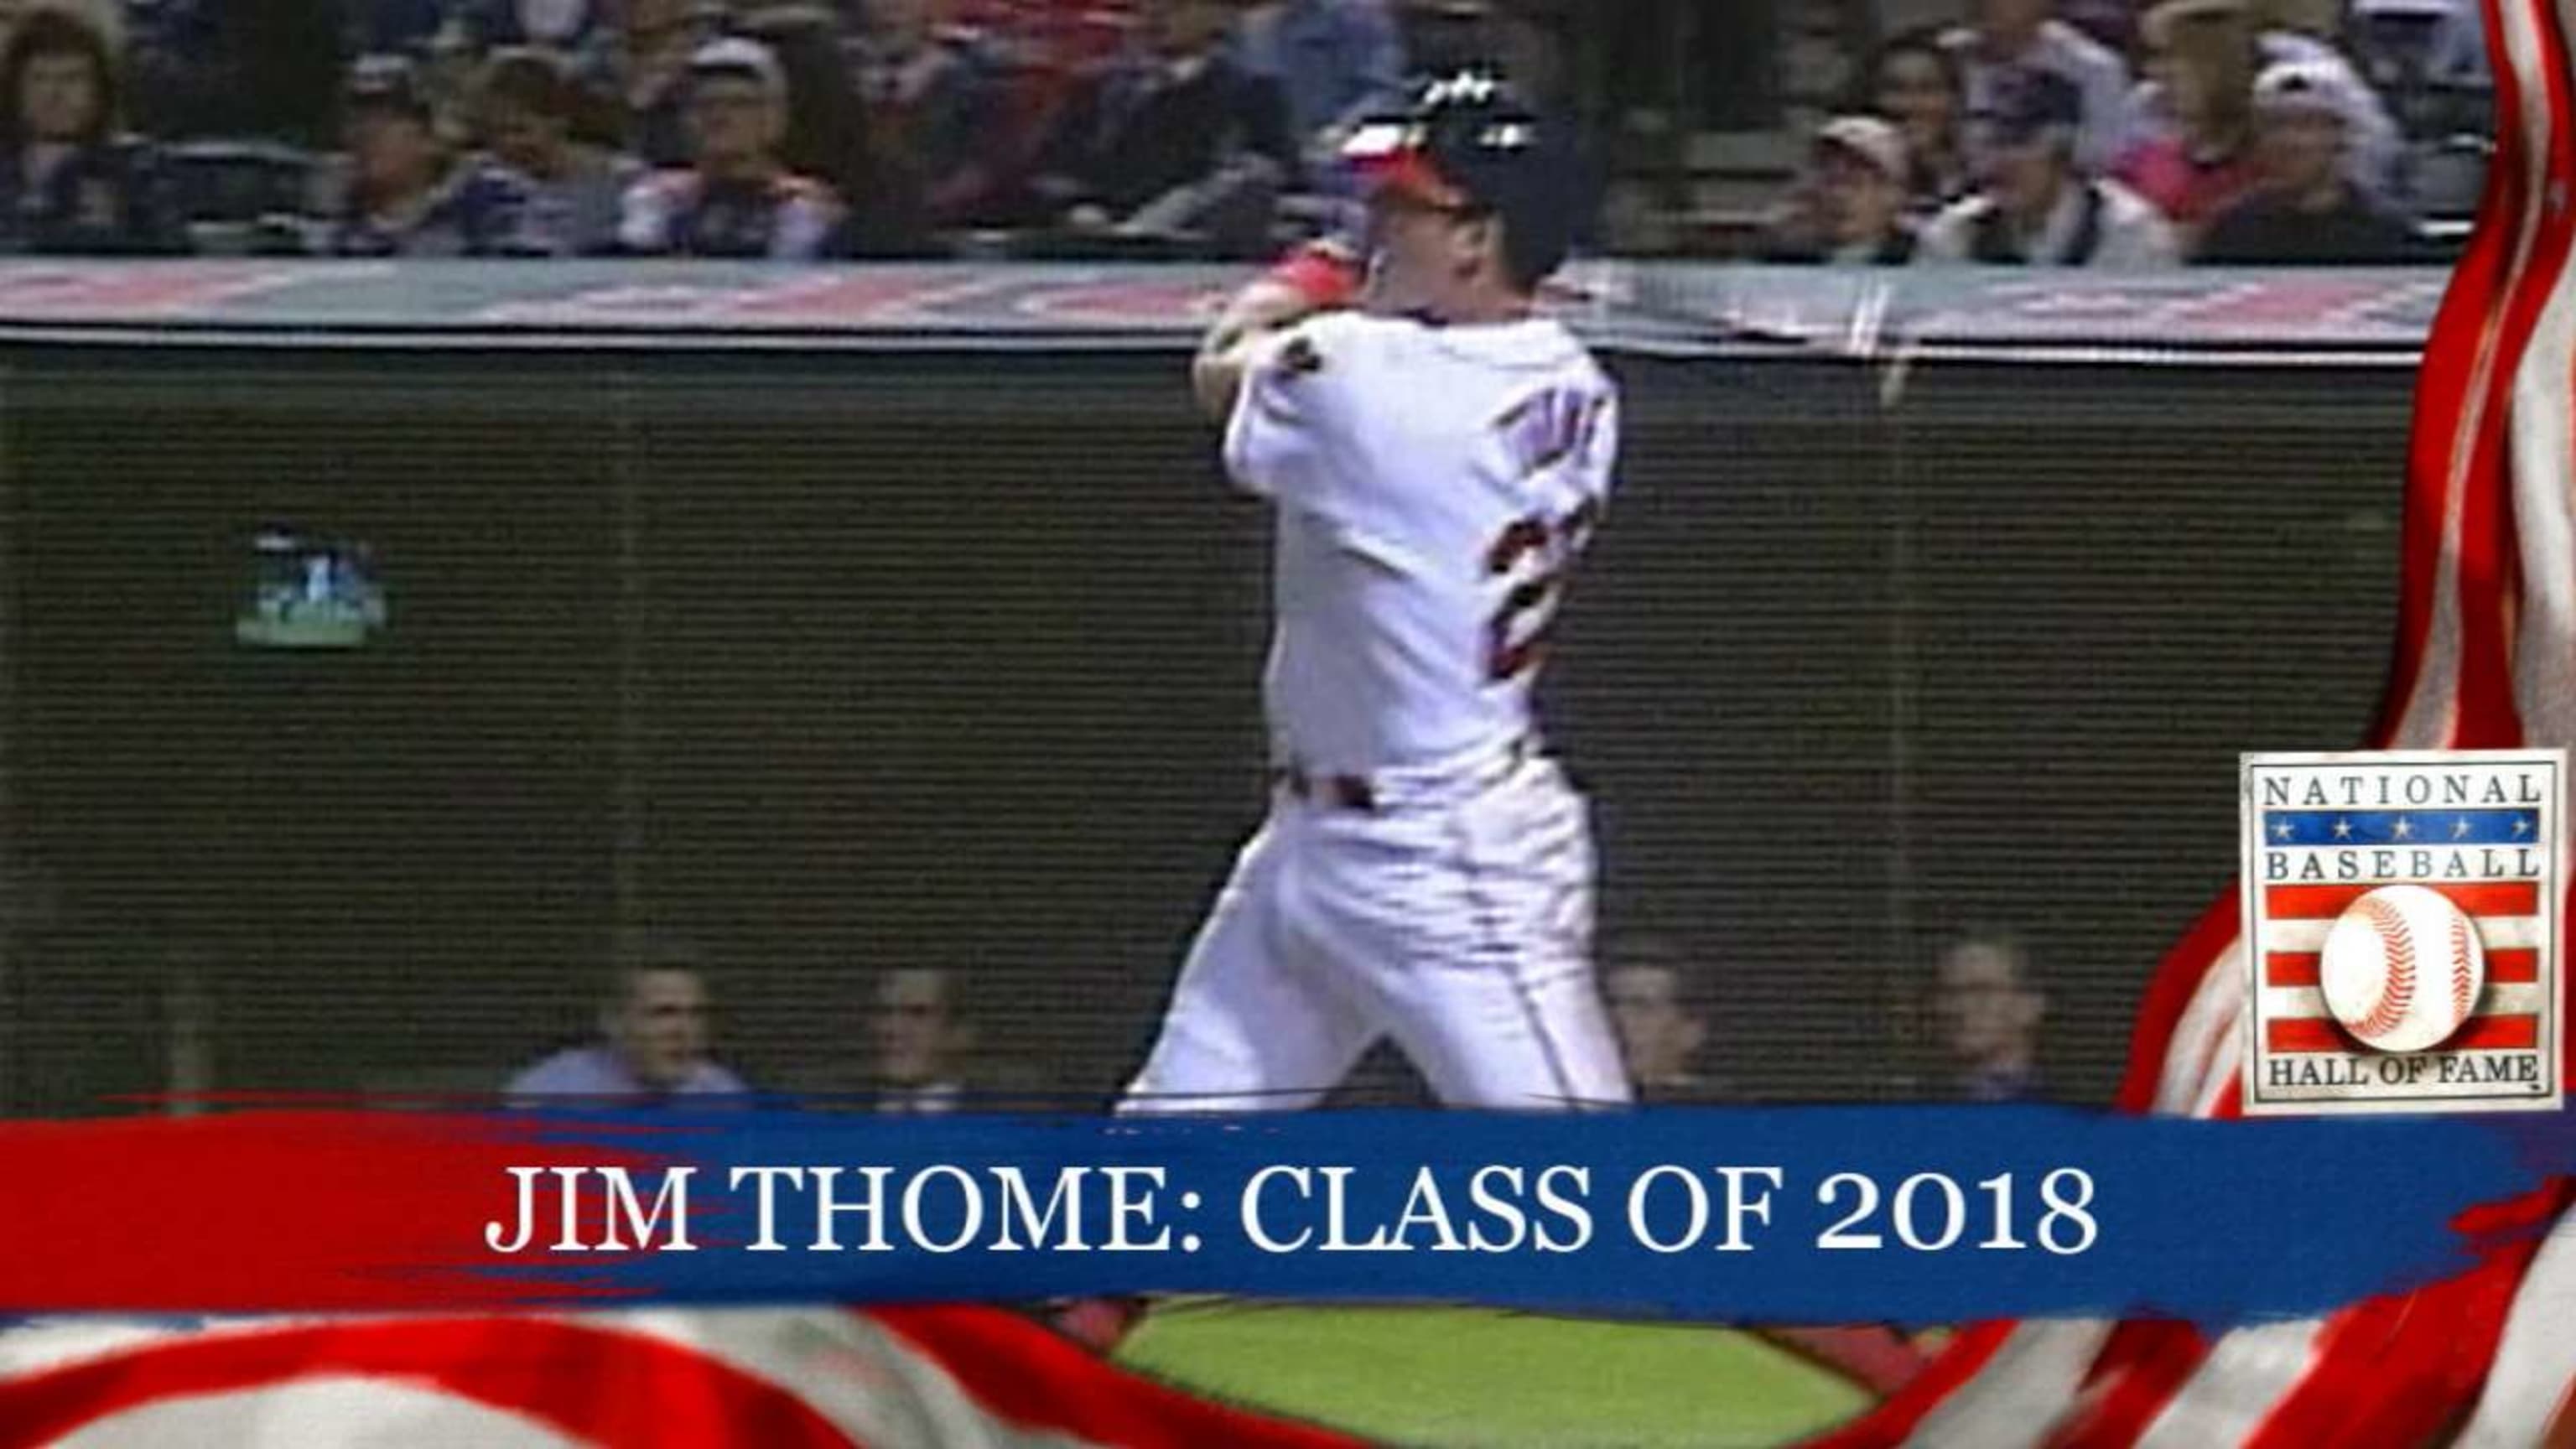 Andrea Thome reflects on Jim Thome's career and call to the Baseball HOF 